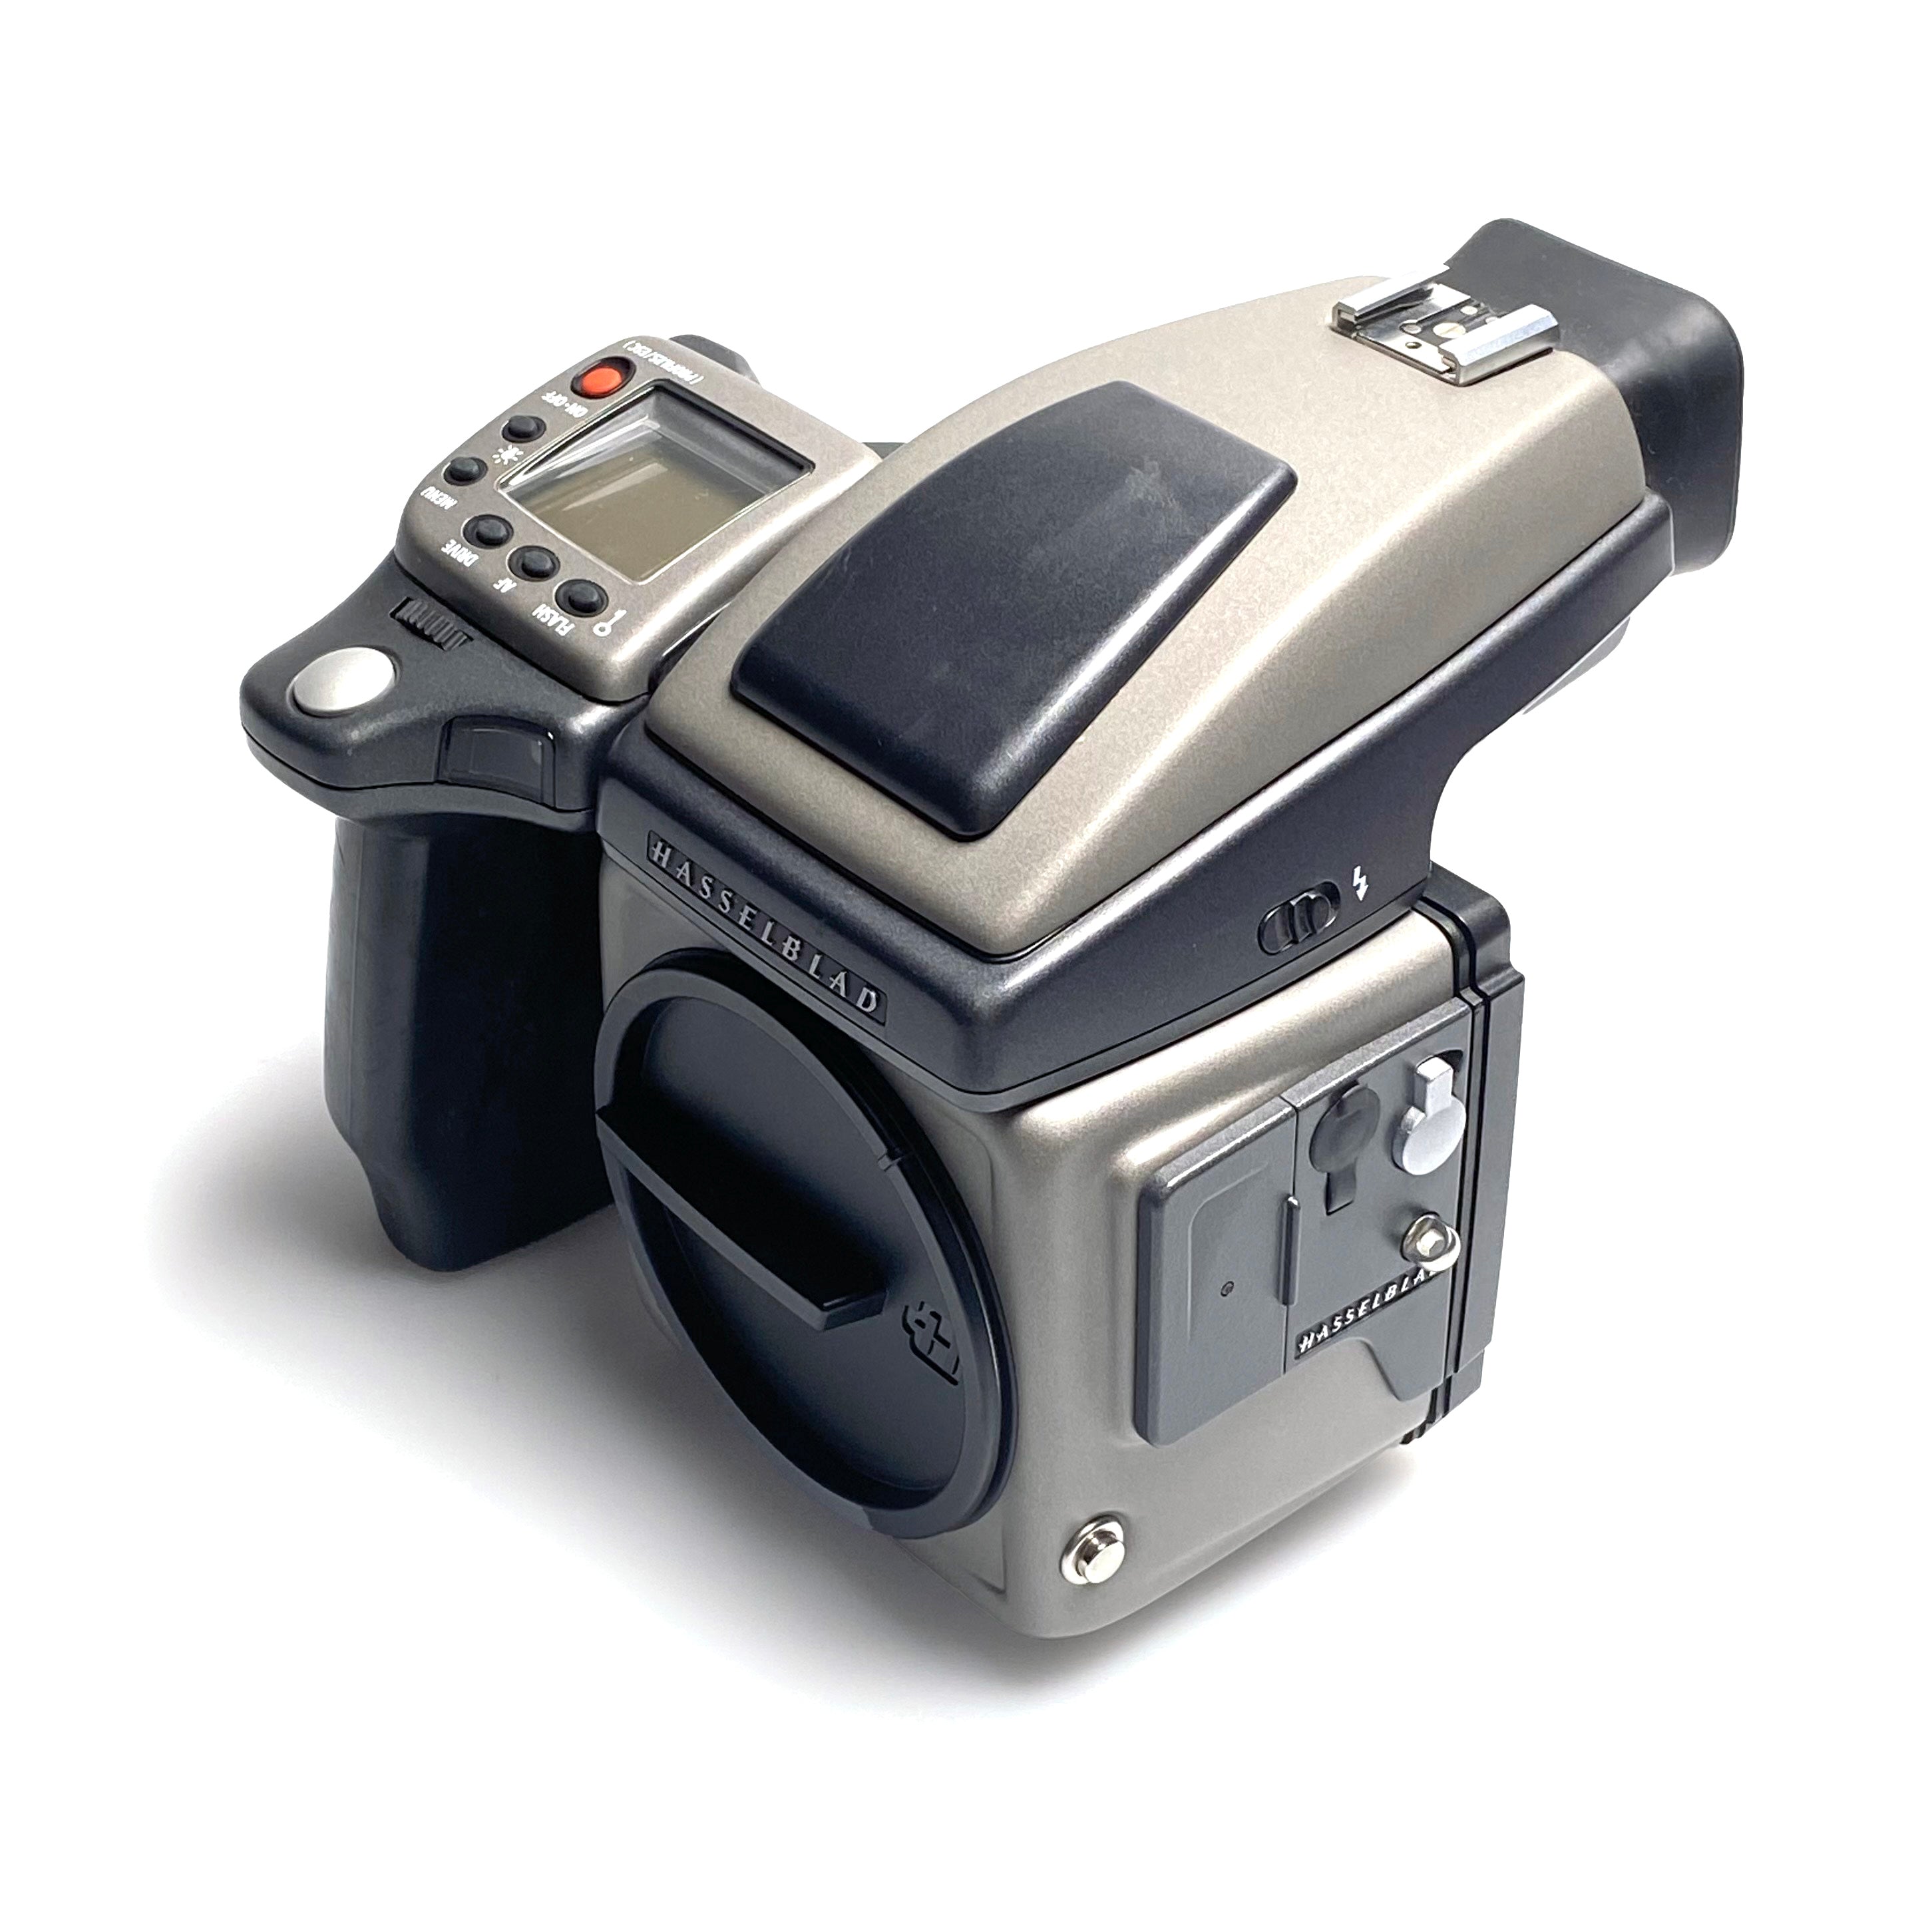 Introducing the Hasselblad H4X